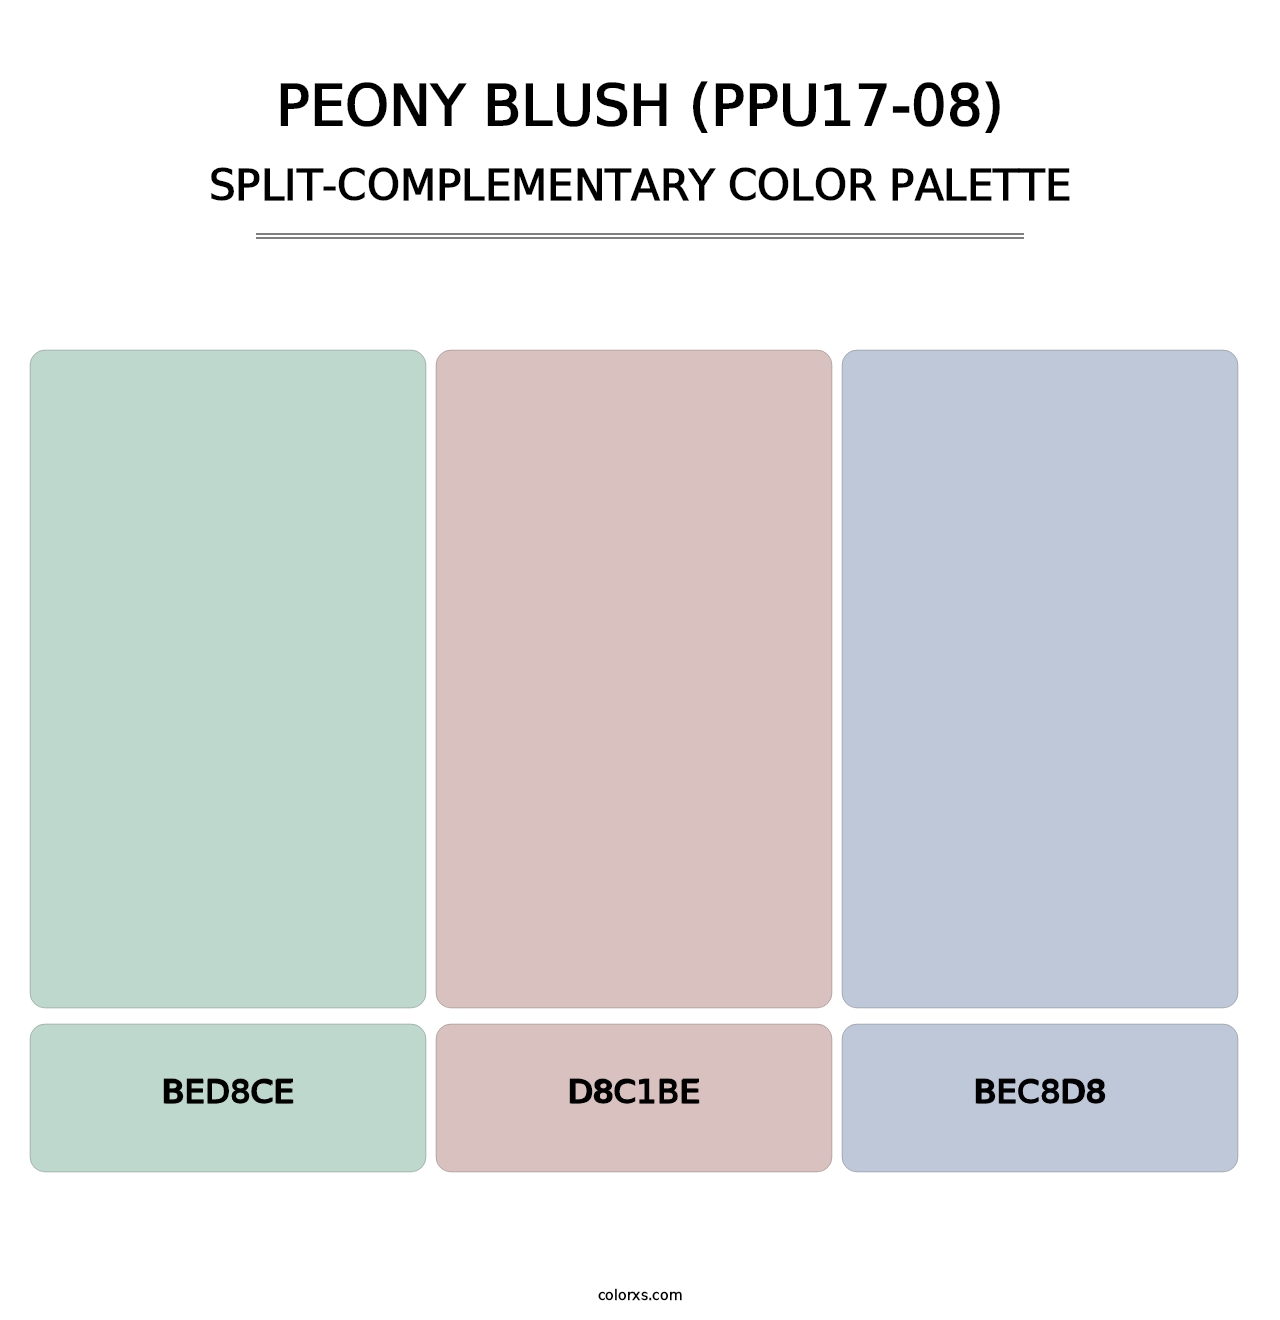 Peony Blush (PPU17-08) - Split-Complementary Color Palette